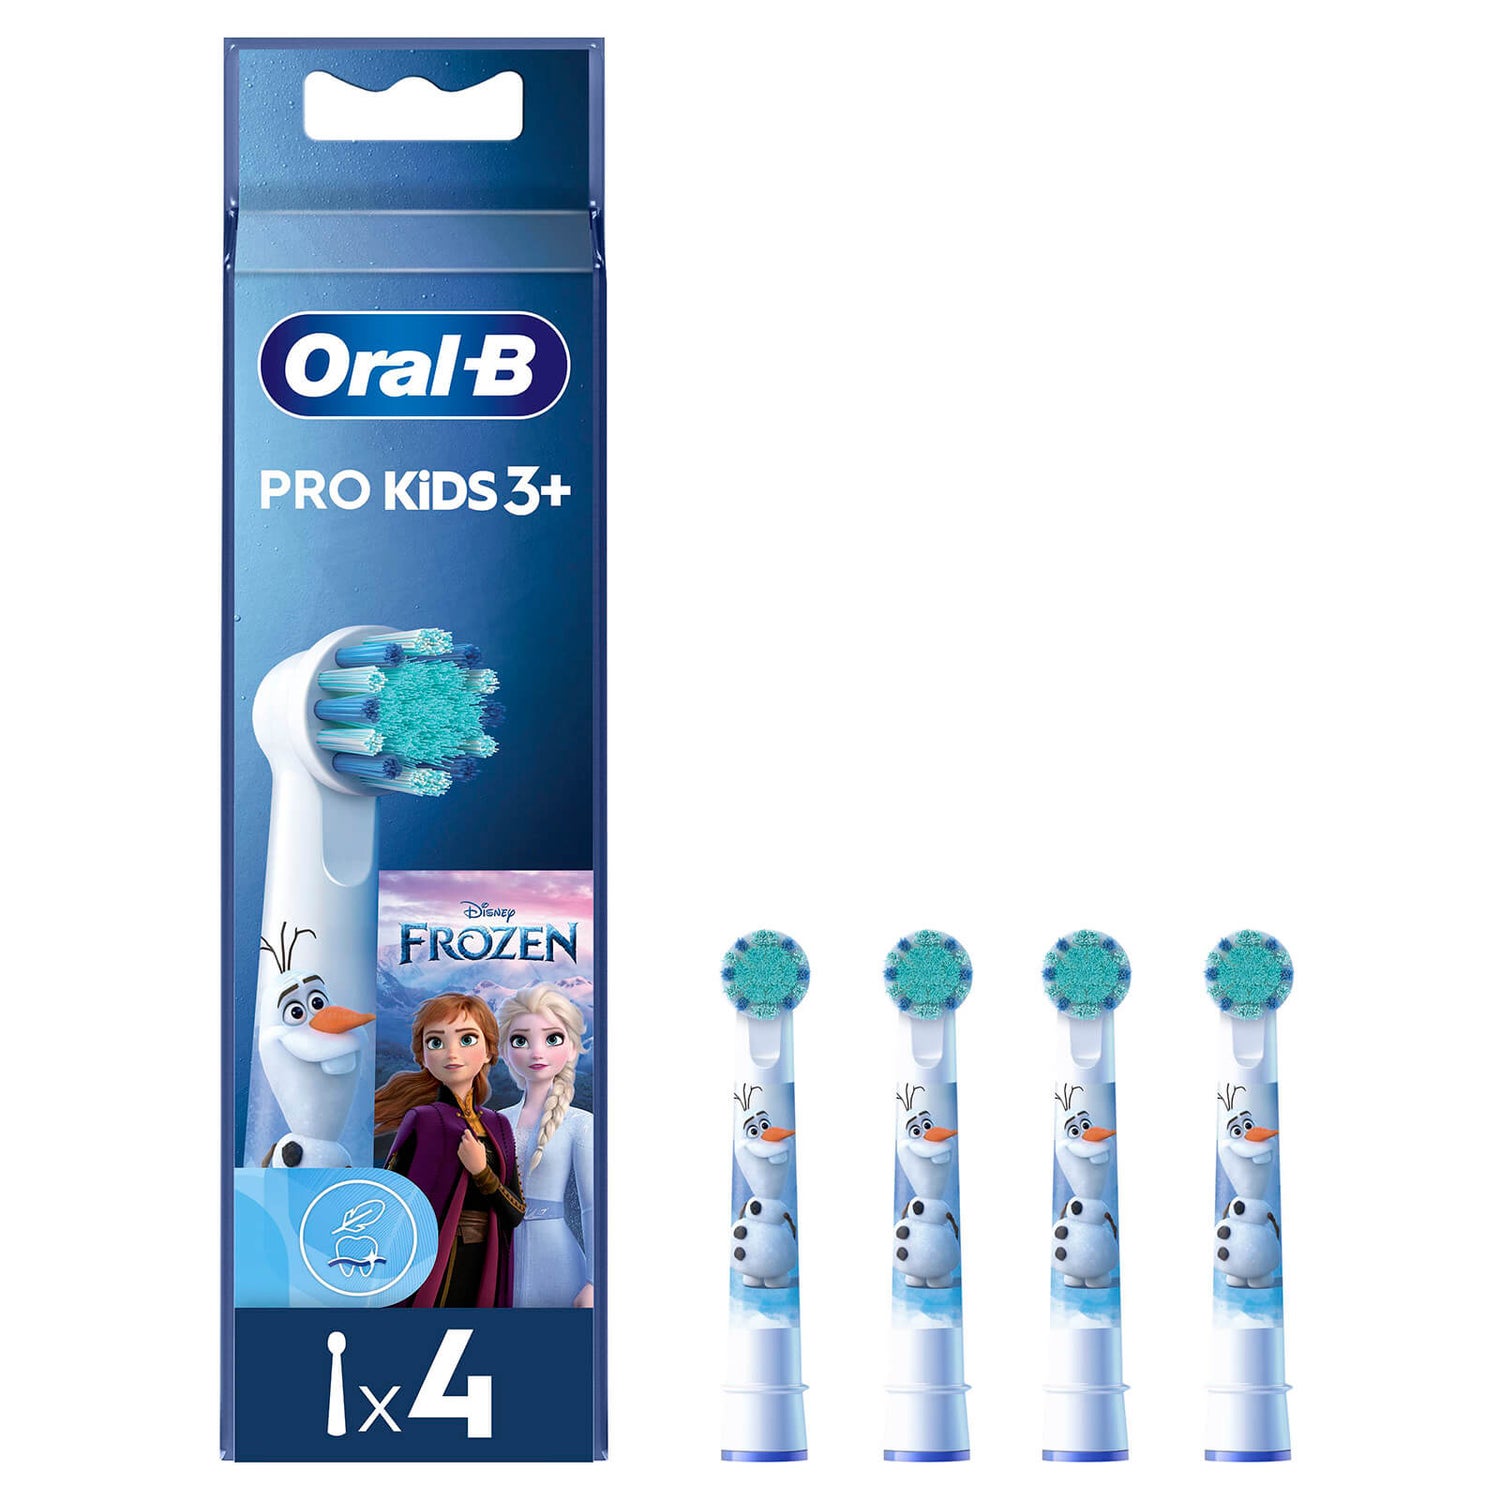 Oral B Kids Frozen Toothbrush Heads - Pack of 4 Counts